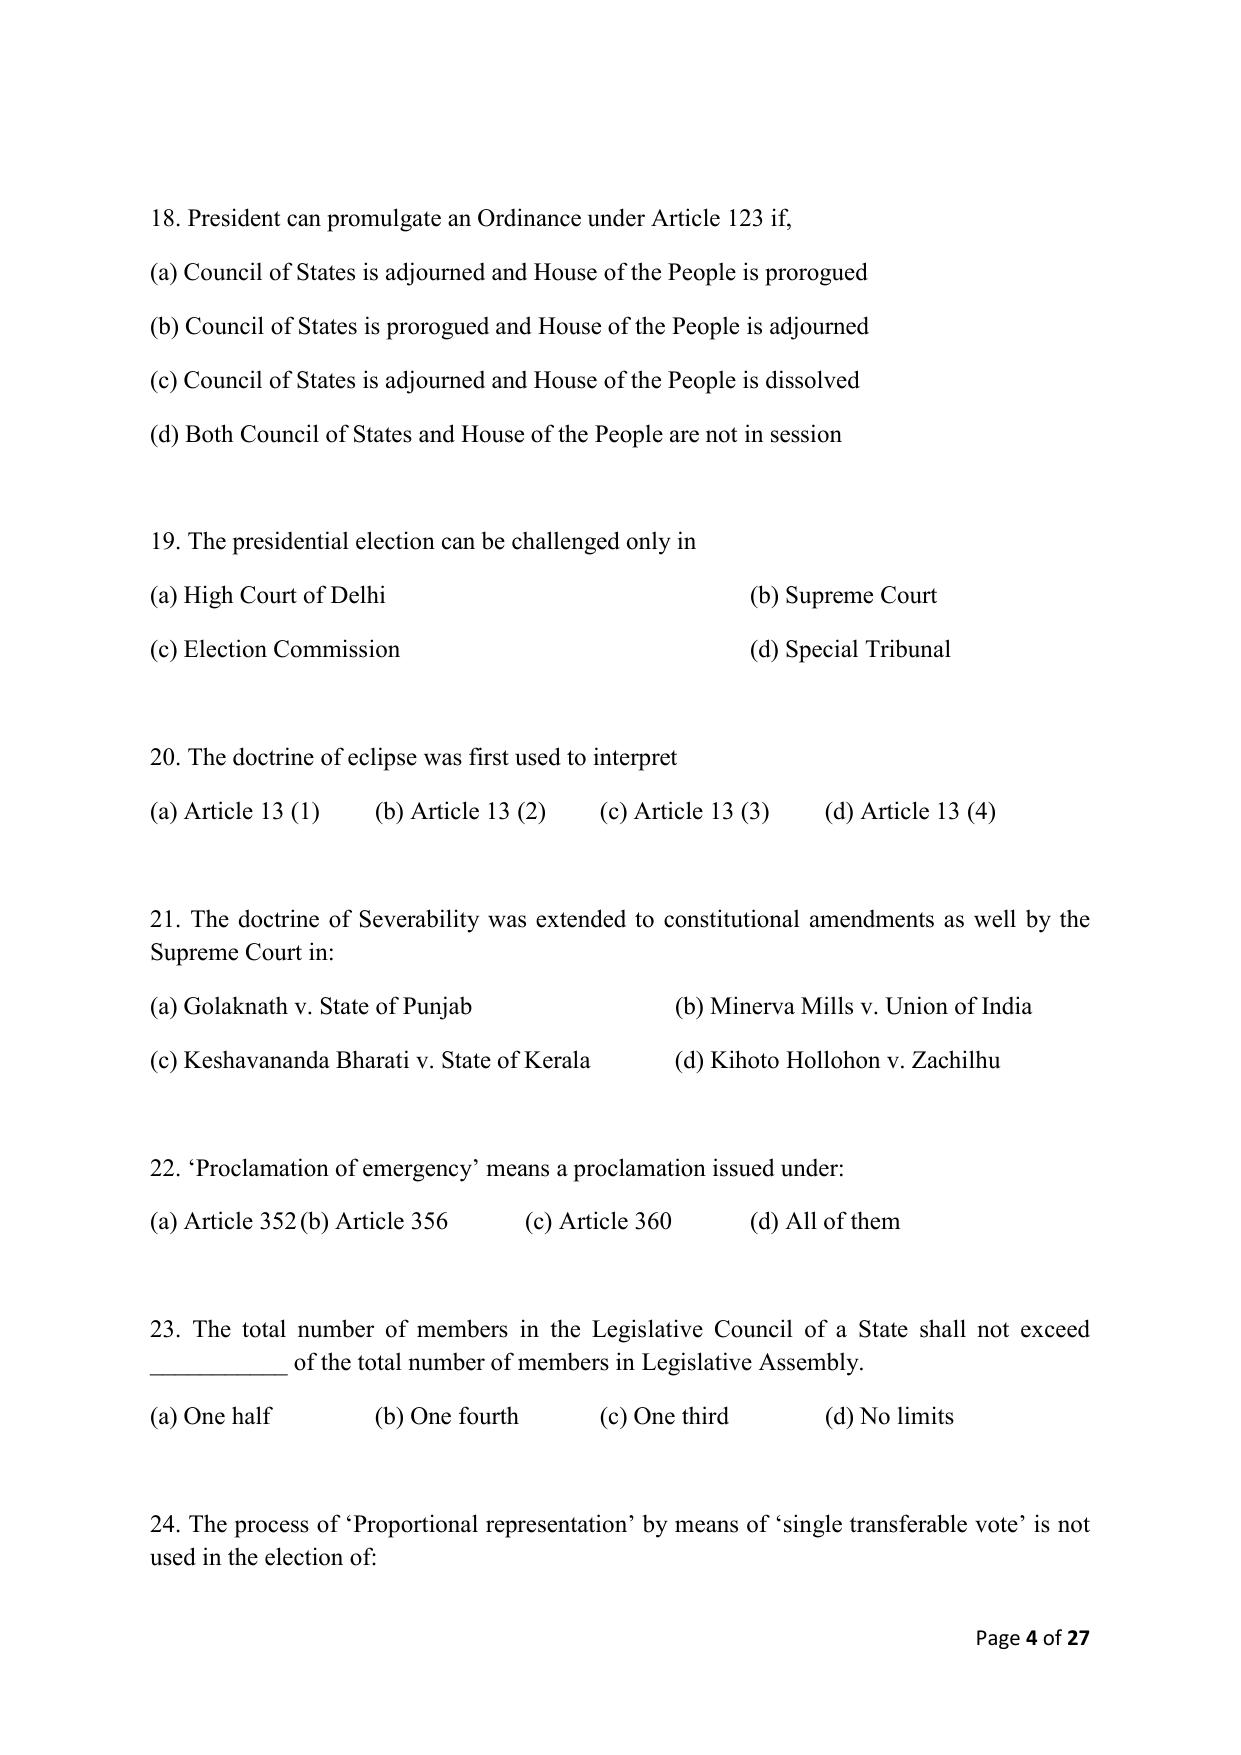 AILET 2020 Question Paper for LLM - Page 4